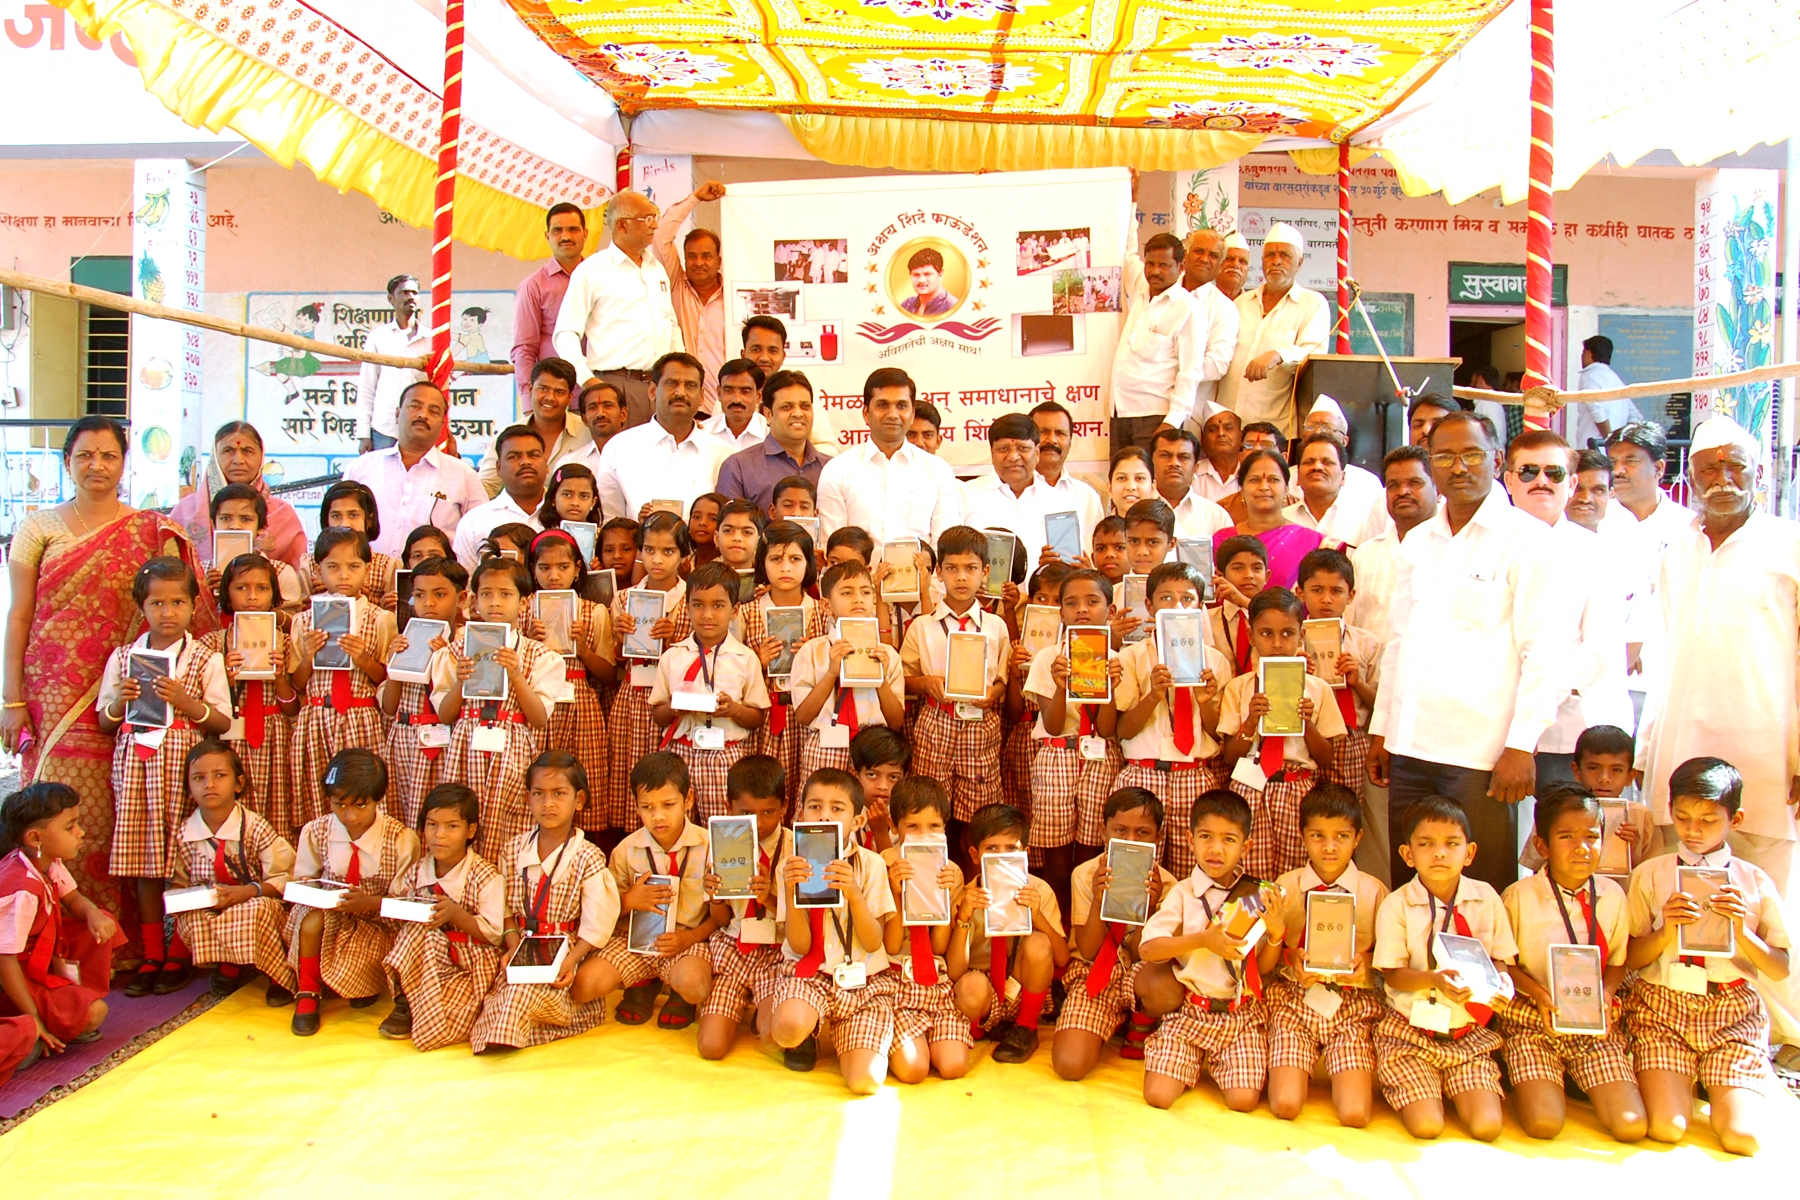 Chaudharwadi, District Baramati: Tablets distribution for high-tech education in Primary school